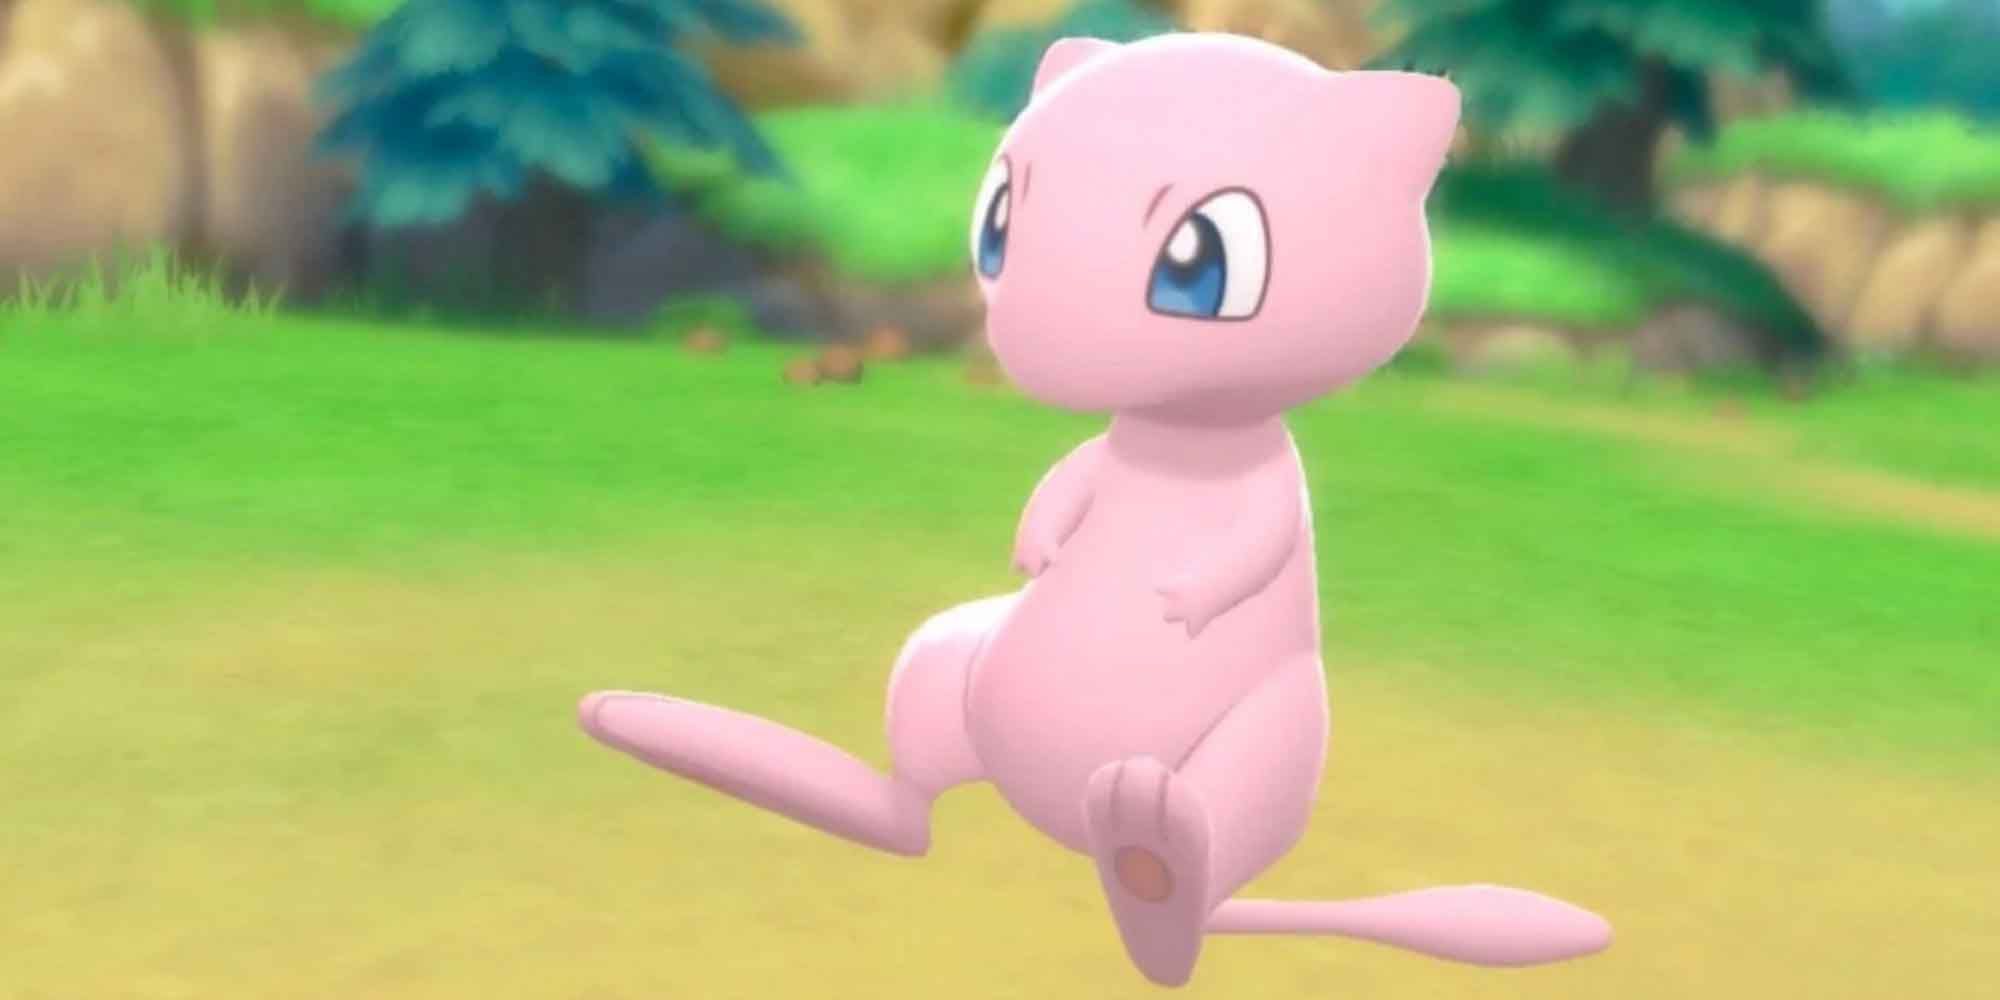 A cute and powerful Pokemon, Mew